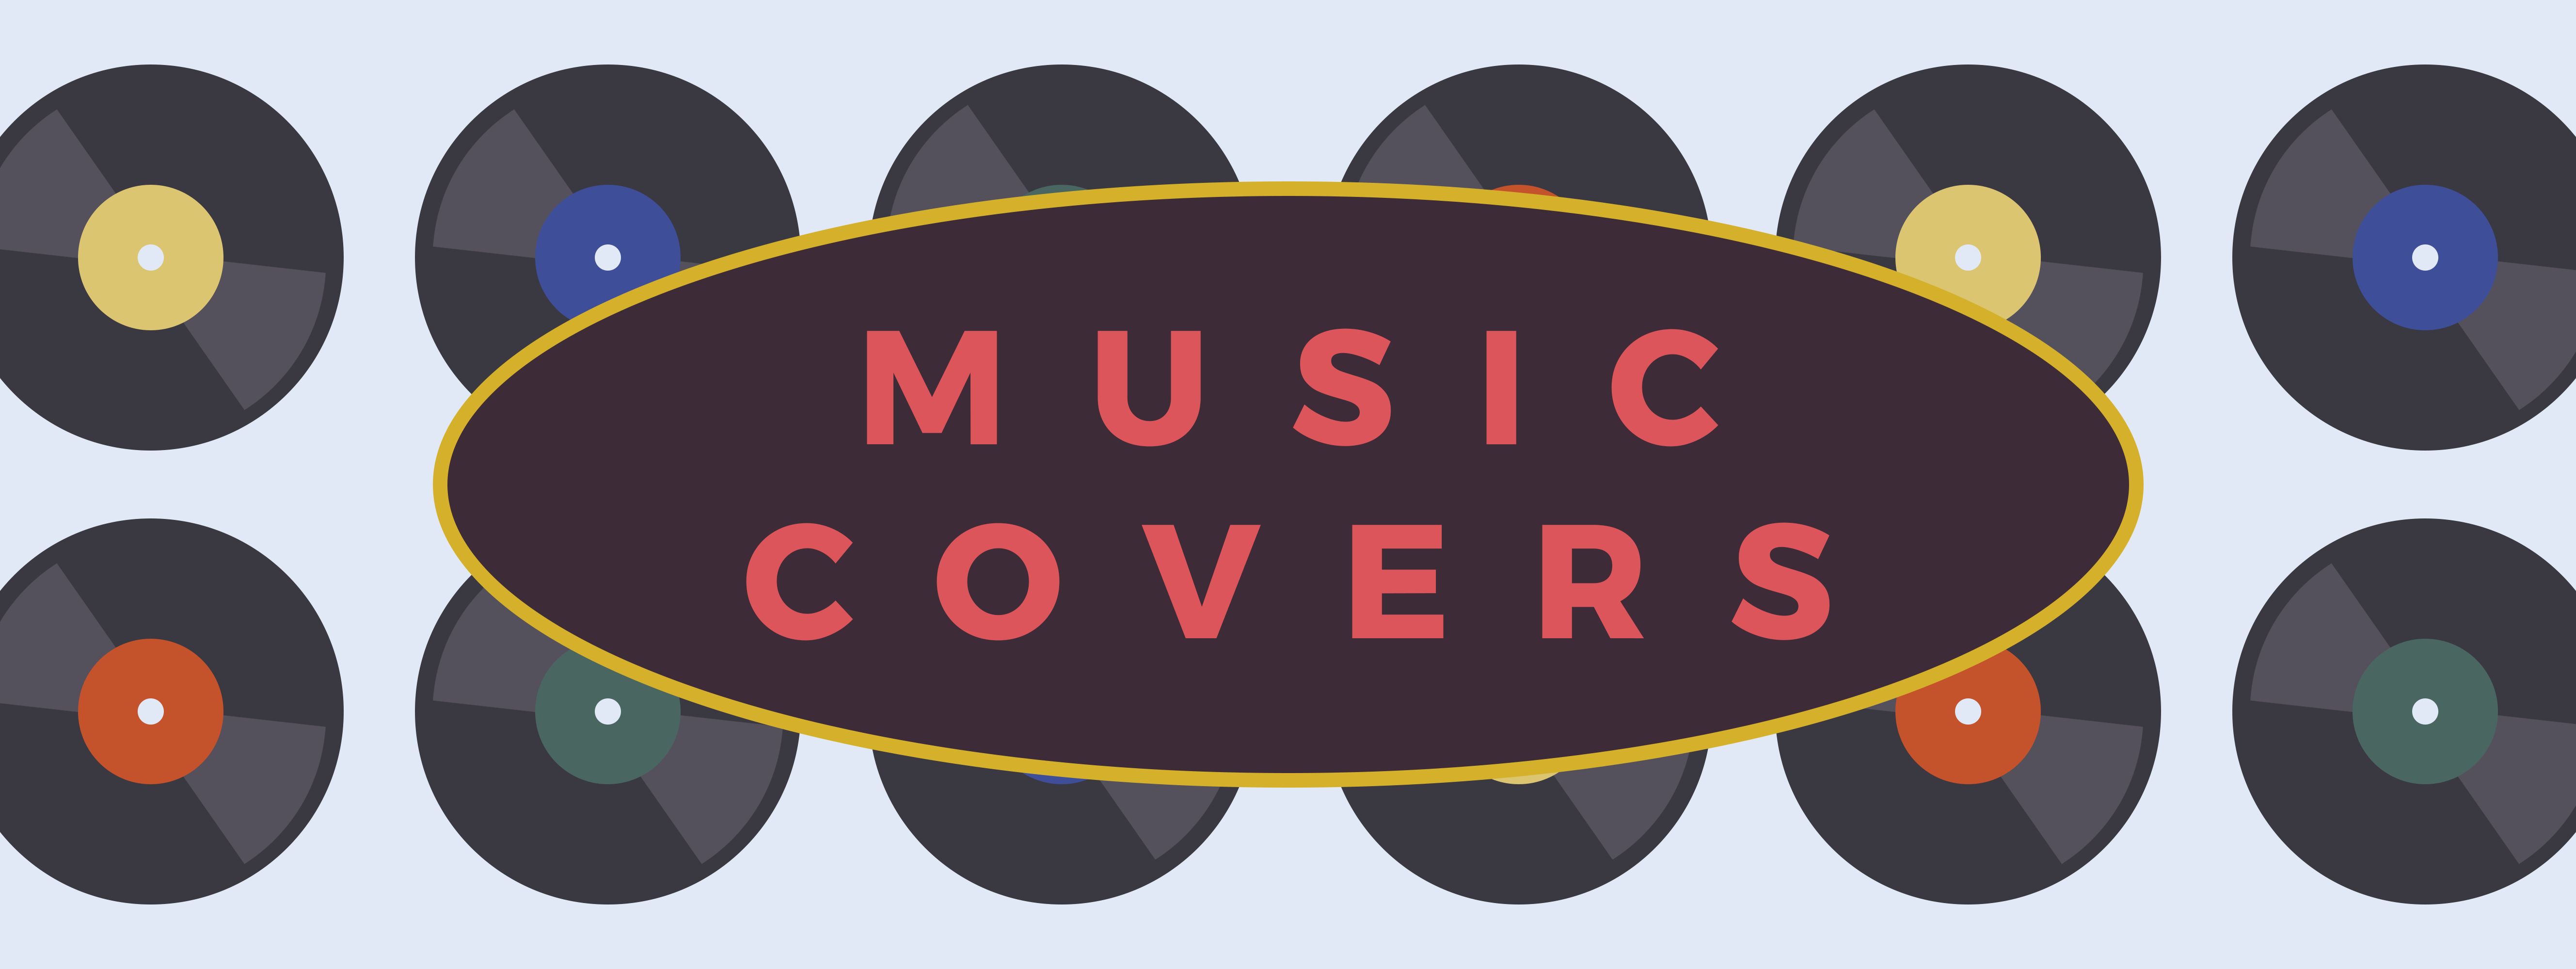 Image of Music Covers